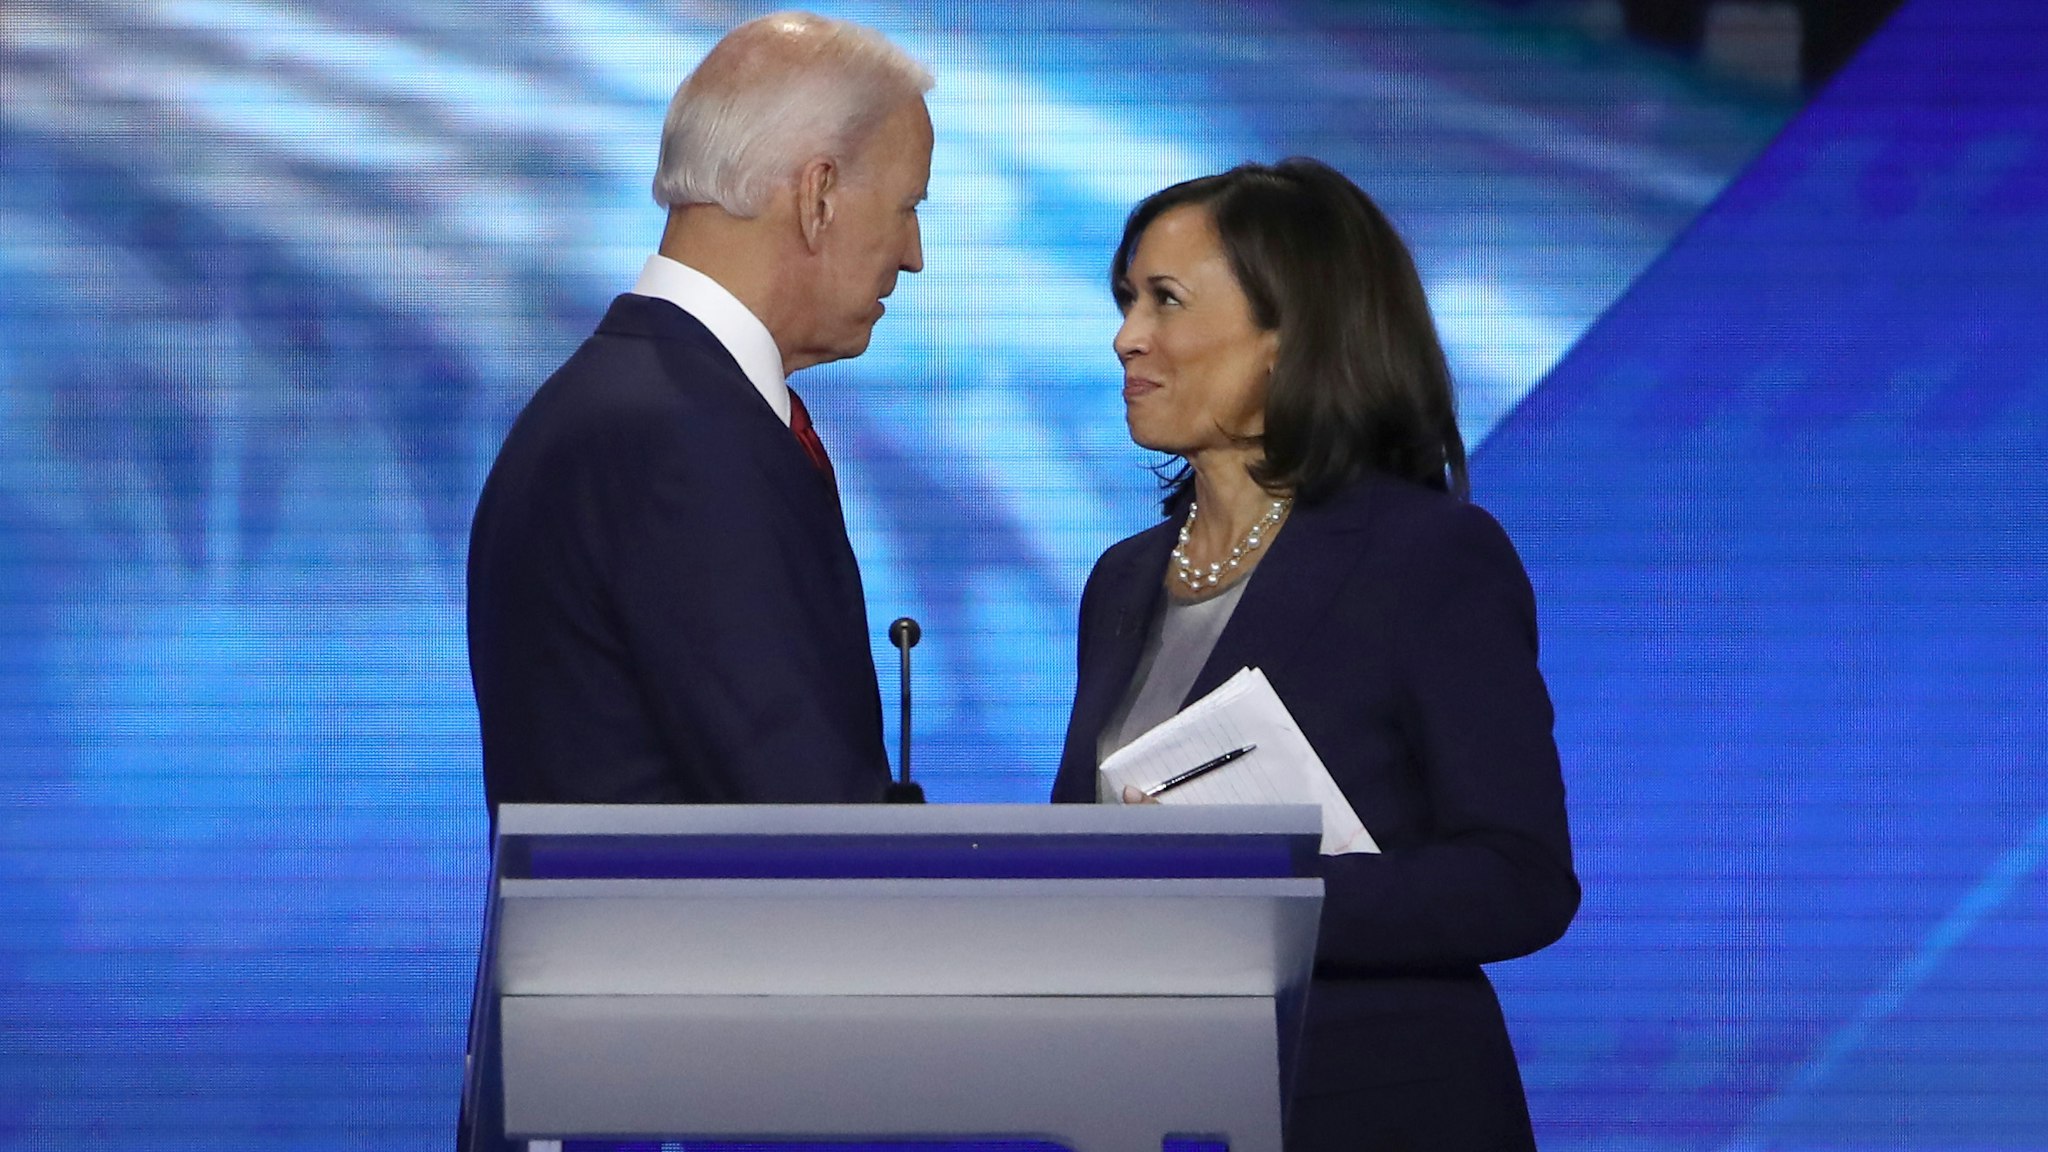 HOUSTON, TEXAS - SEPTEMBER 12: Democratic presidential candidates former Vice President Joe Biden and Sen. Kamala Harris (D-CA) speak after the Democratic Presidential Debate at Texas Southern University's Health and PE Center on September 12, 2019 in Houston, Texas. Ten Democratic presidential hopefuls were chosen from the larger field of candidates to participate in the debate hosted by ABC News in partnership with Univision. (Photo by Win McNamee/Getty Images)